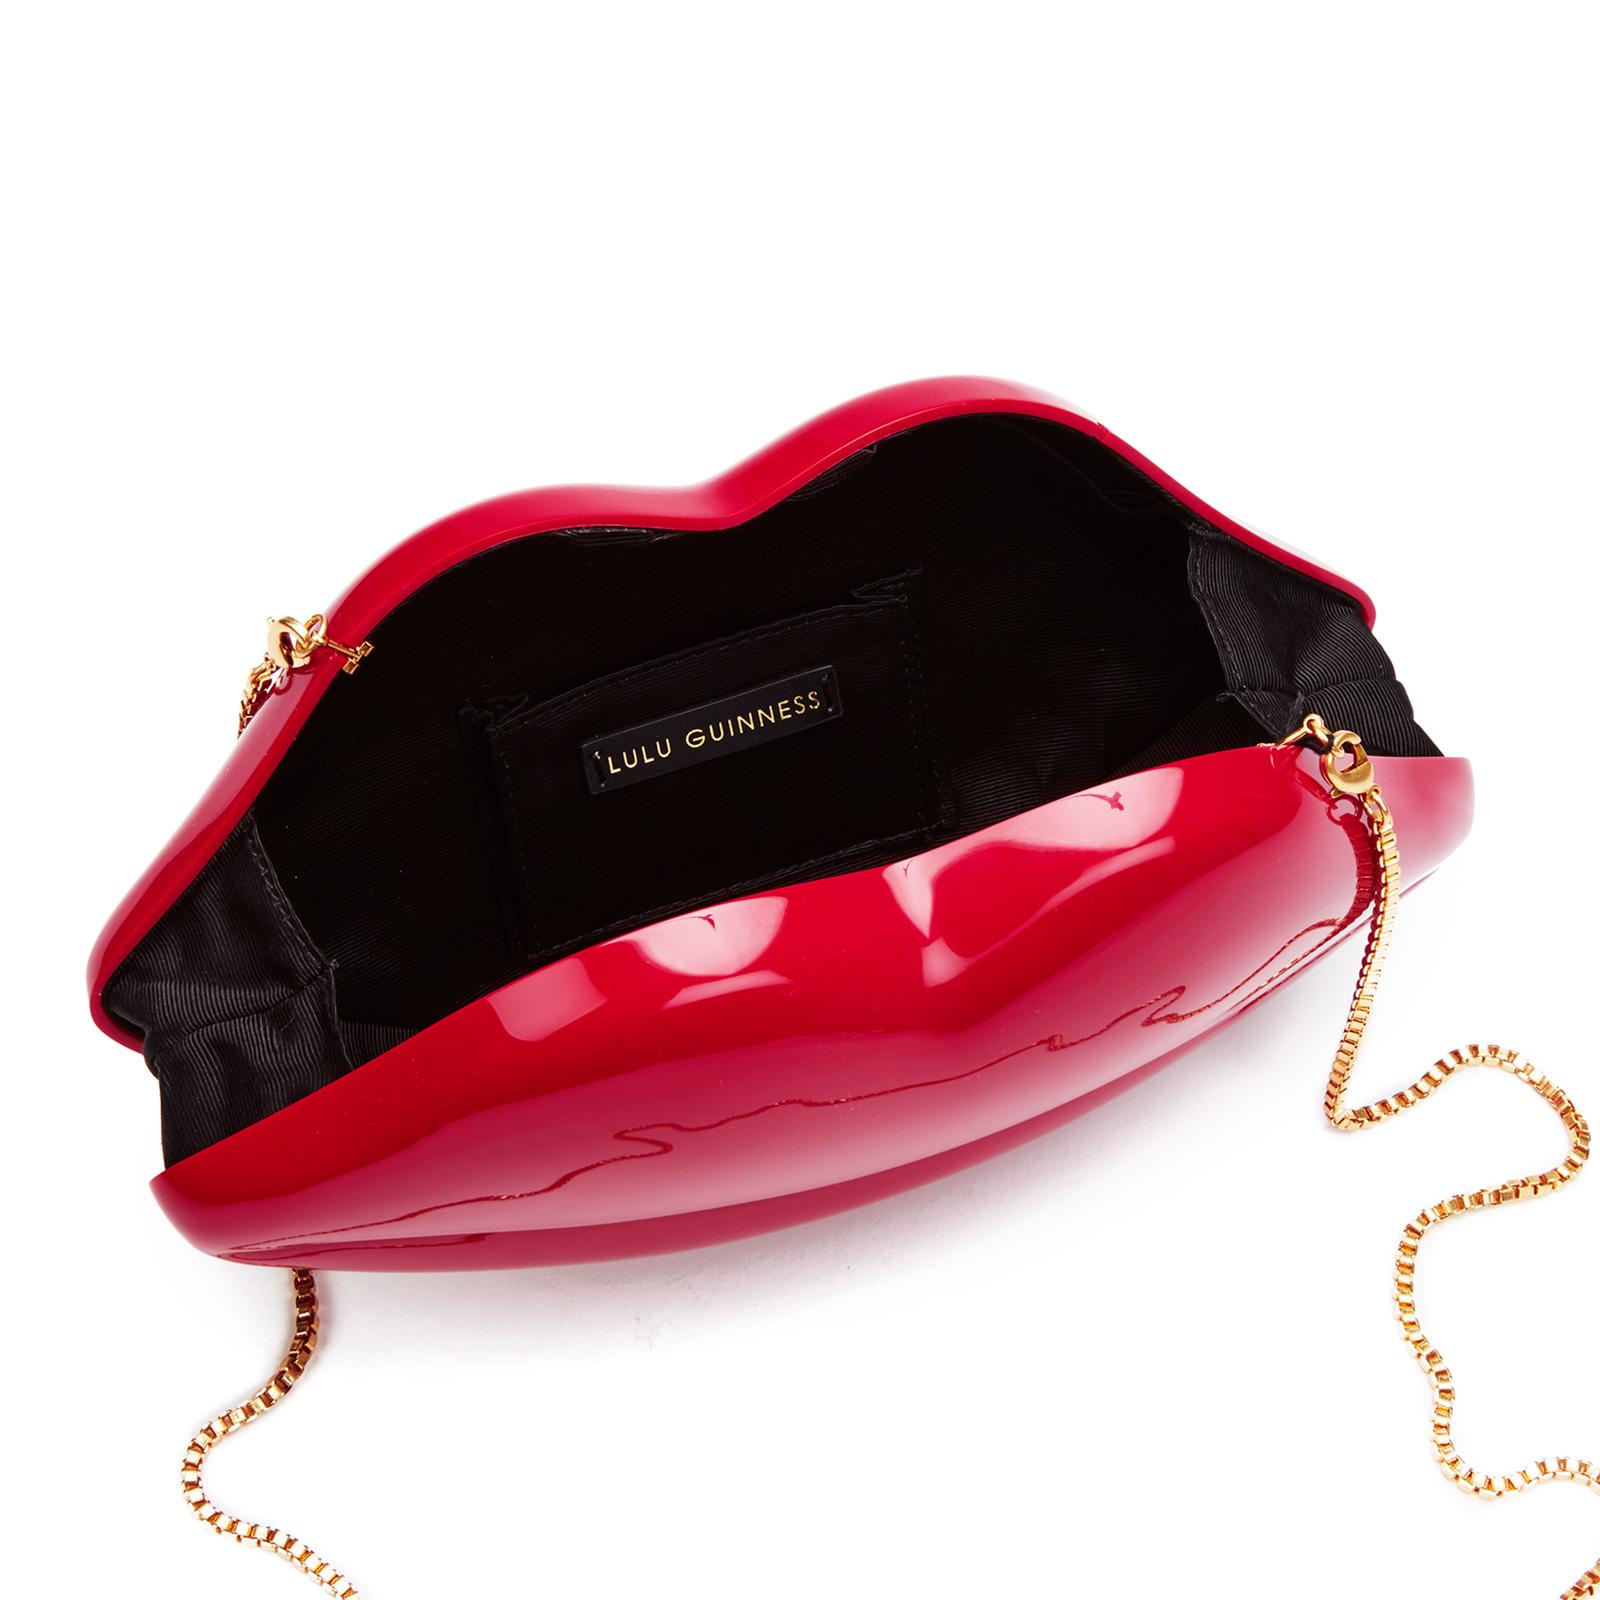 Lulu Guinness Leather Large Perspex Lips Clutch Bag in Red - Lyst